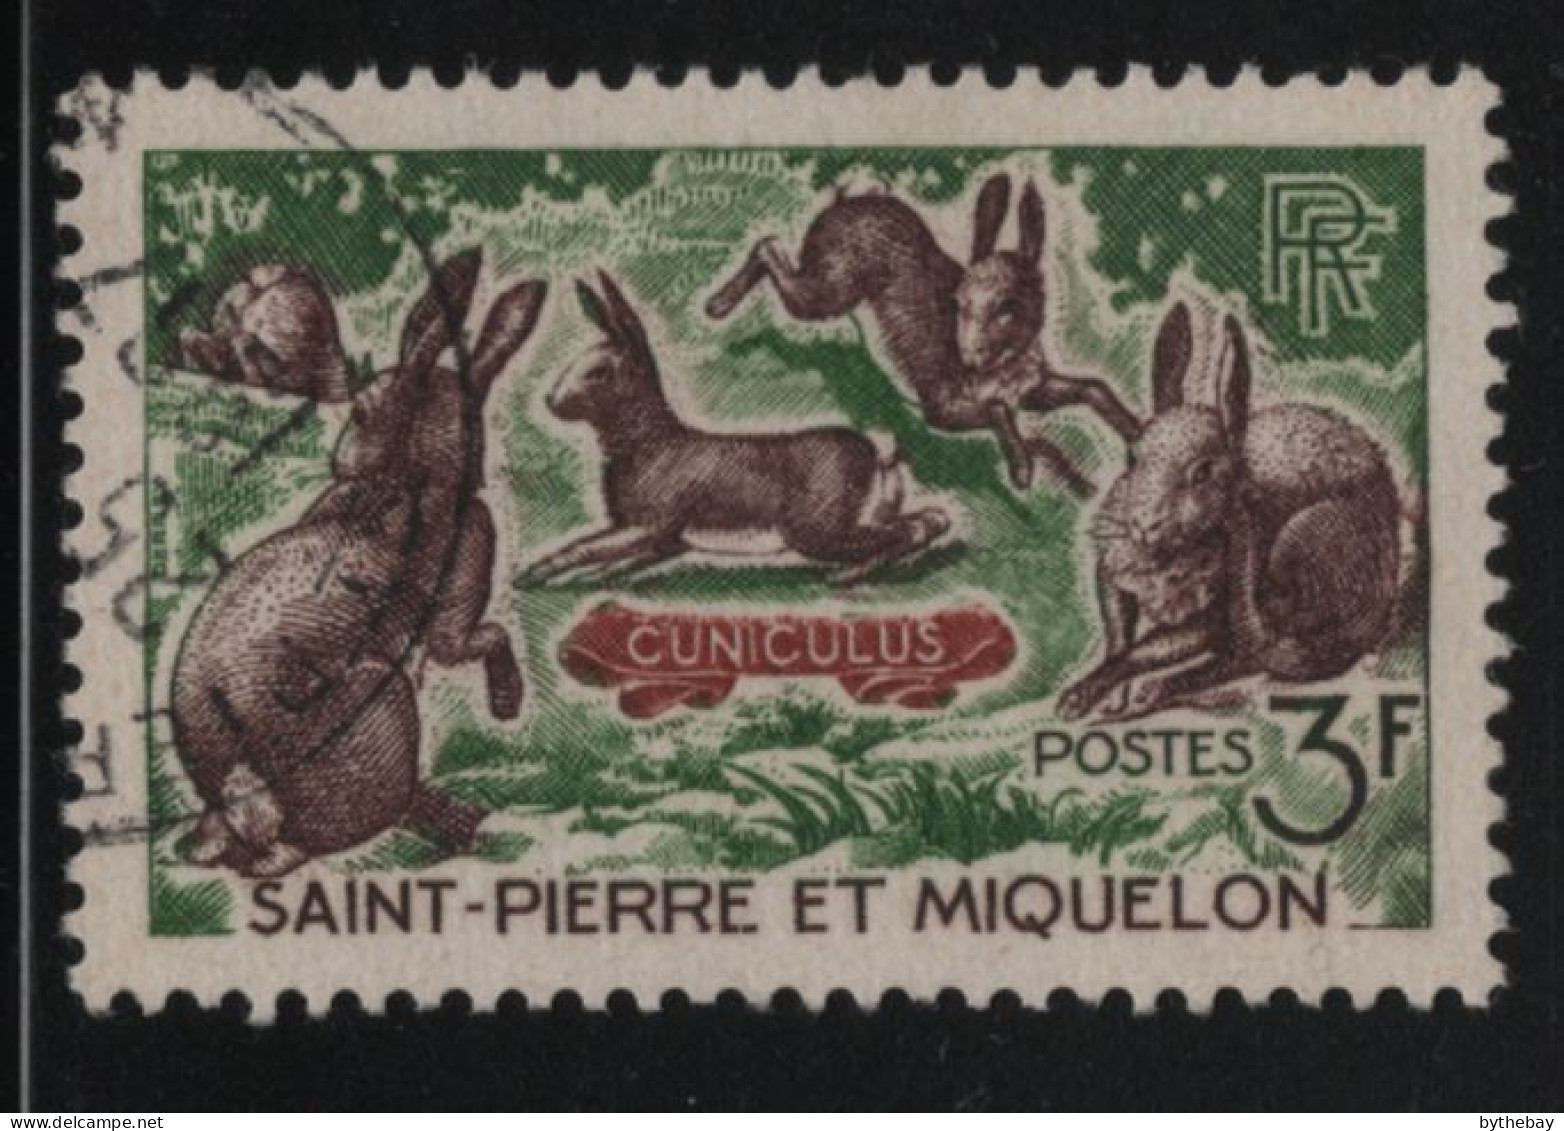 St Pierre Et Miquelon 1964 Used Sc 370 3fr Rabbits - Used Stamps